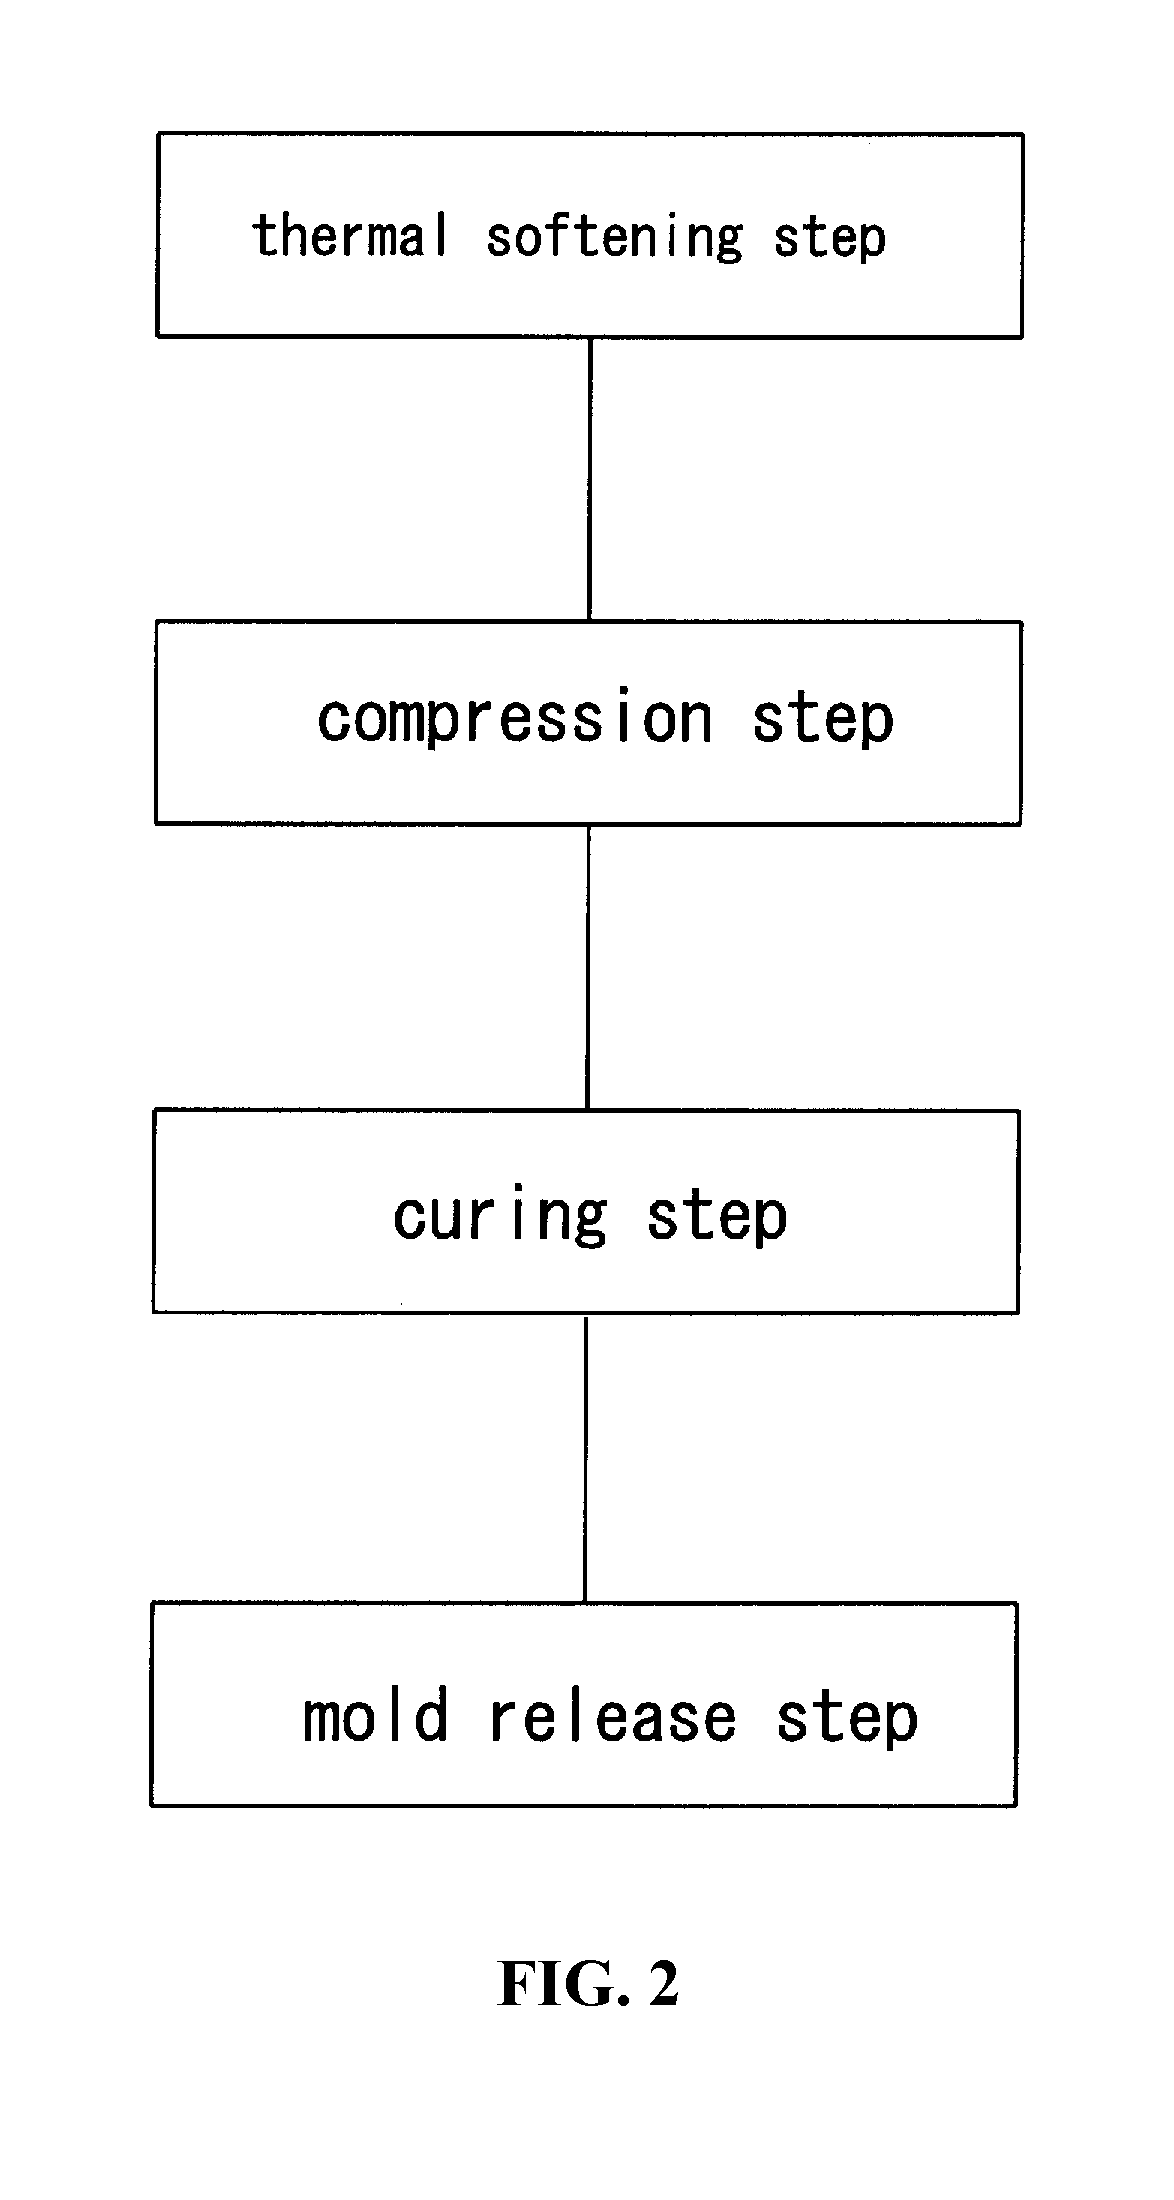 Method for forming cushions